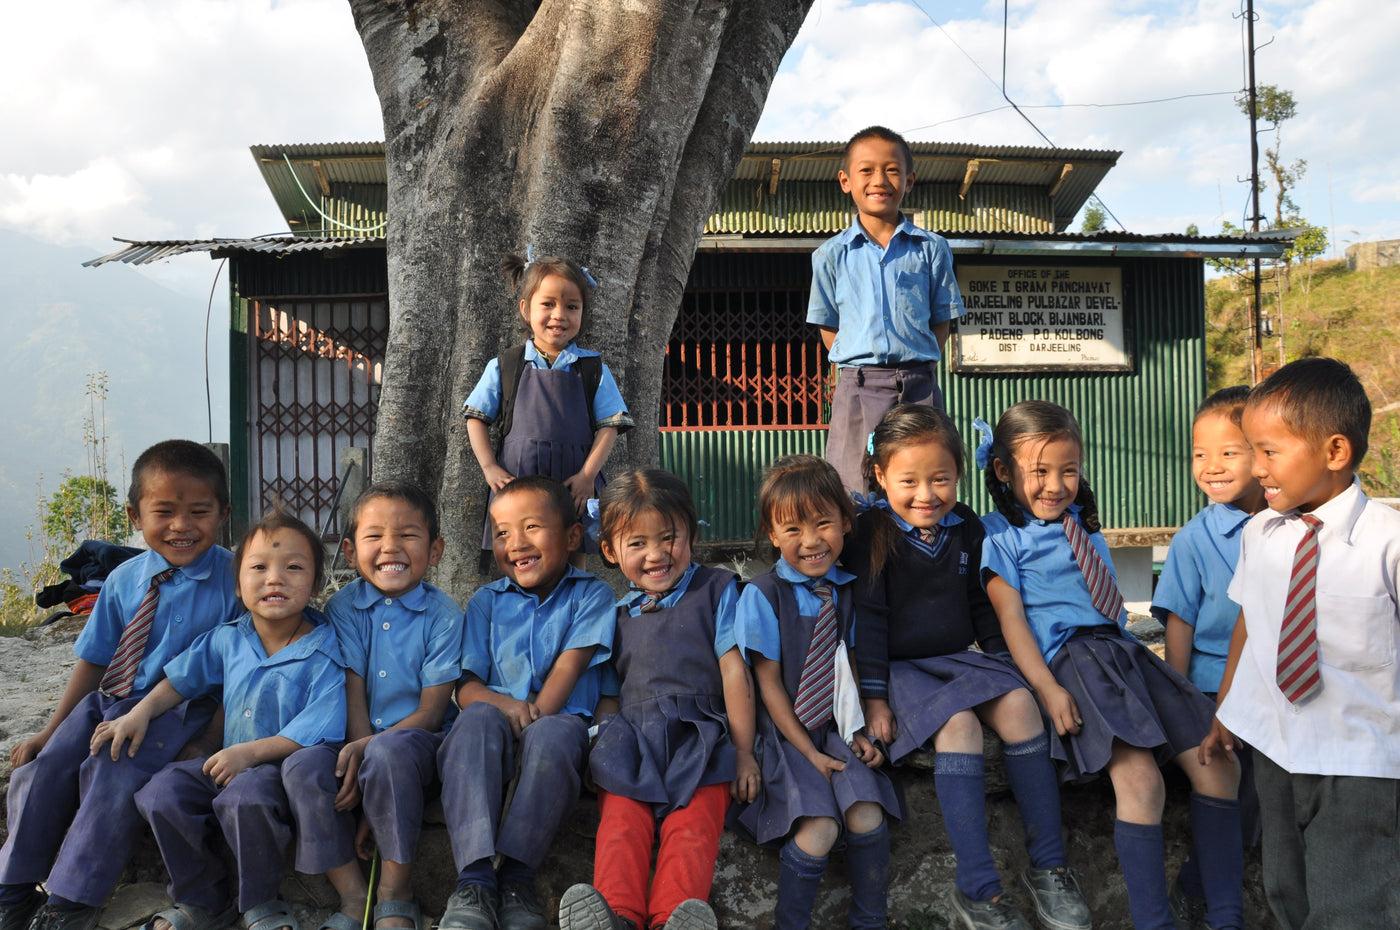 Group of Himalayan school children in blue uniforms laughing in front of schoolhouse.